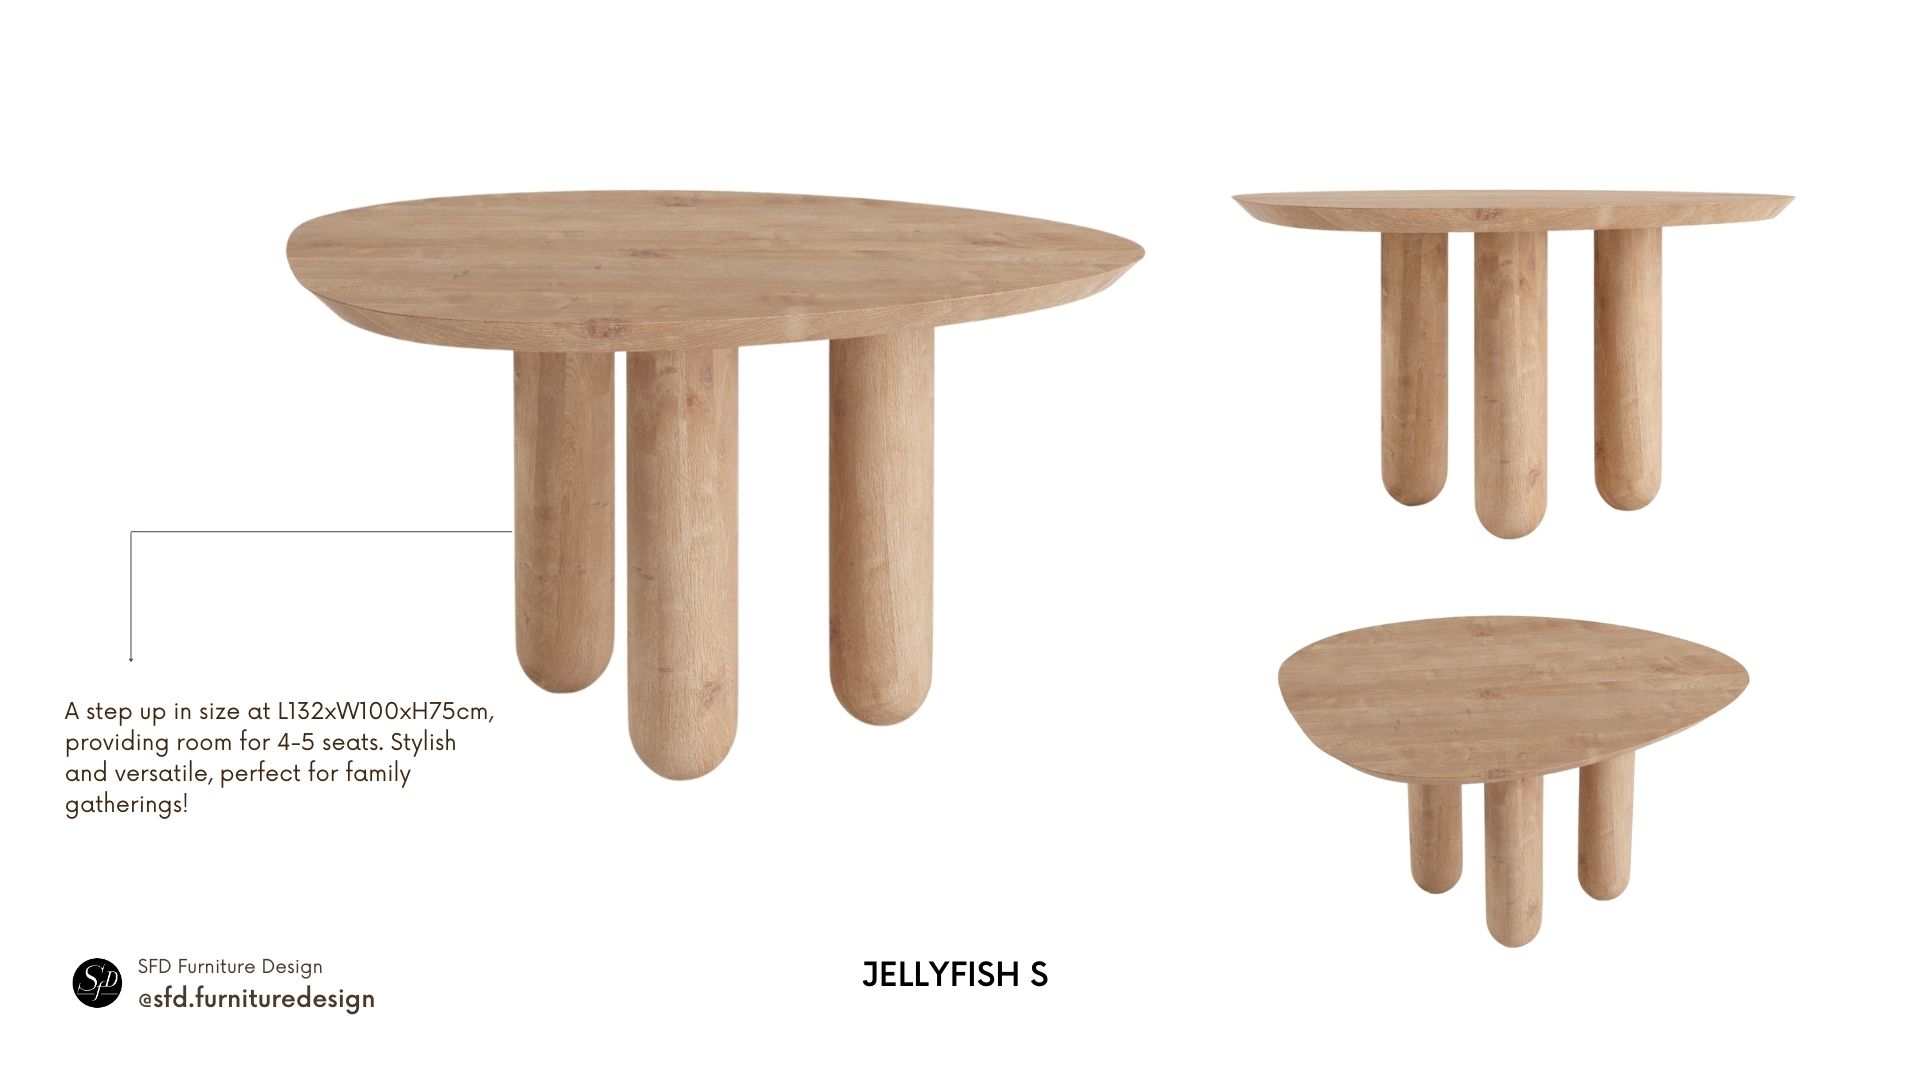 JELLYFISH natural wood dining table-S